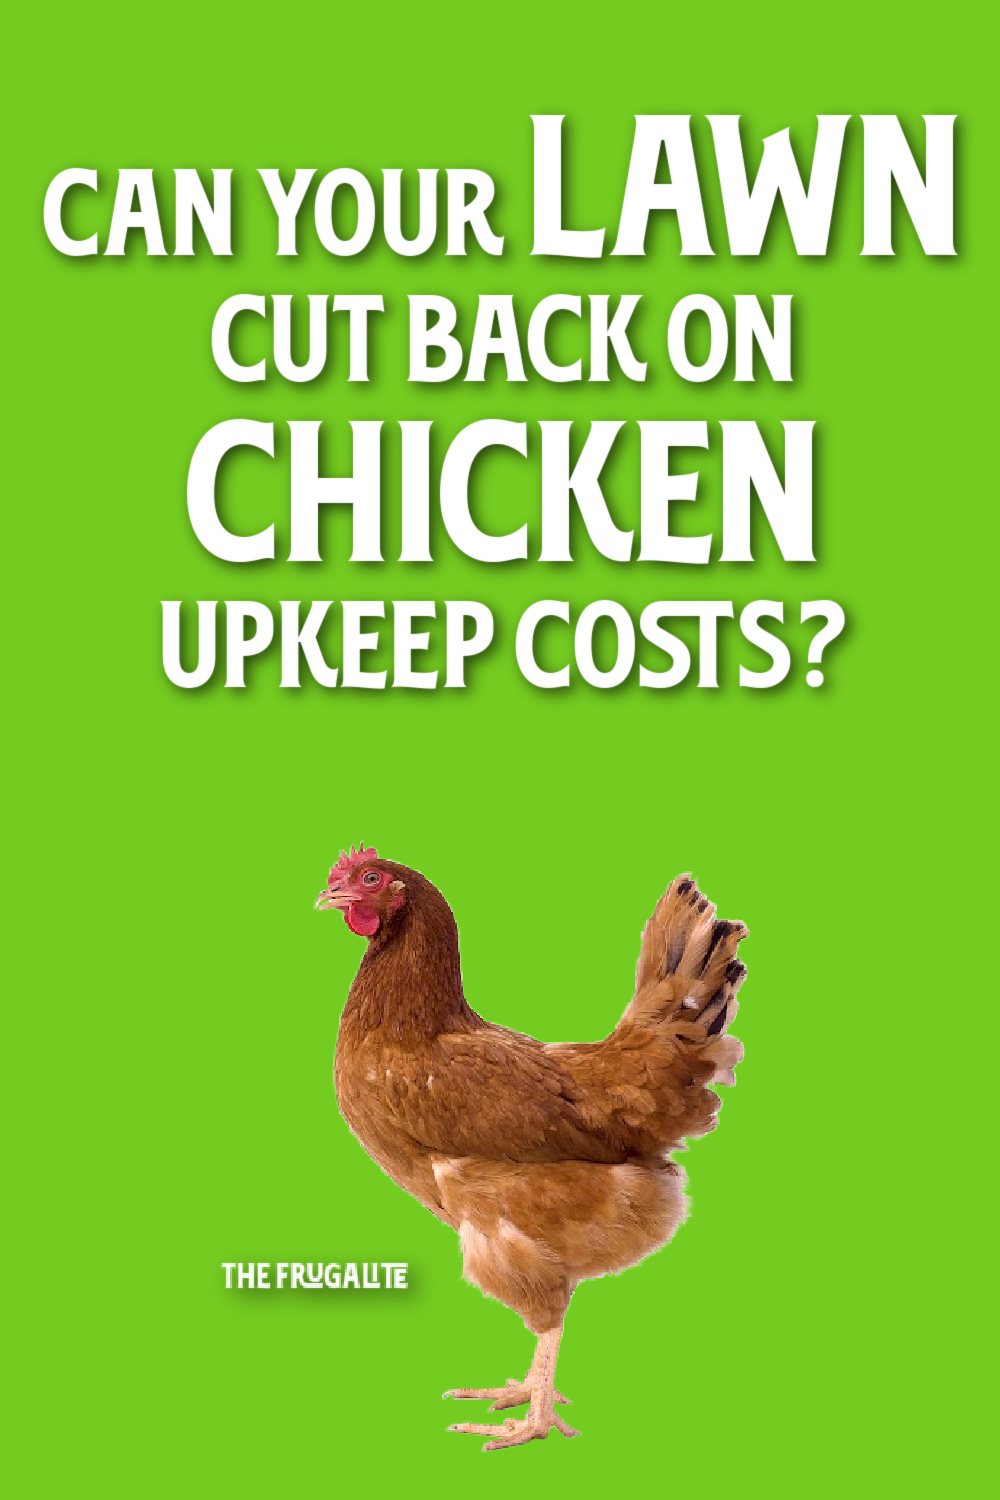 Can Your Lawn Cut Back on Chicken Upkeep Costs?